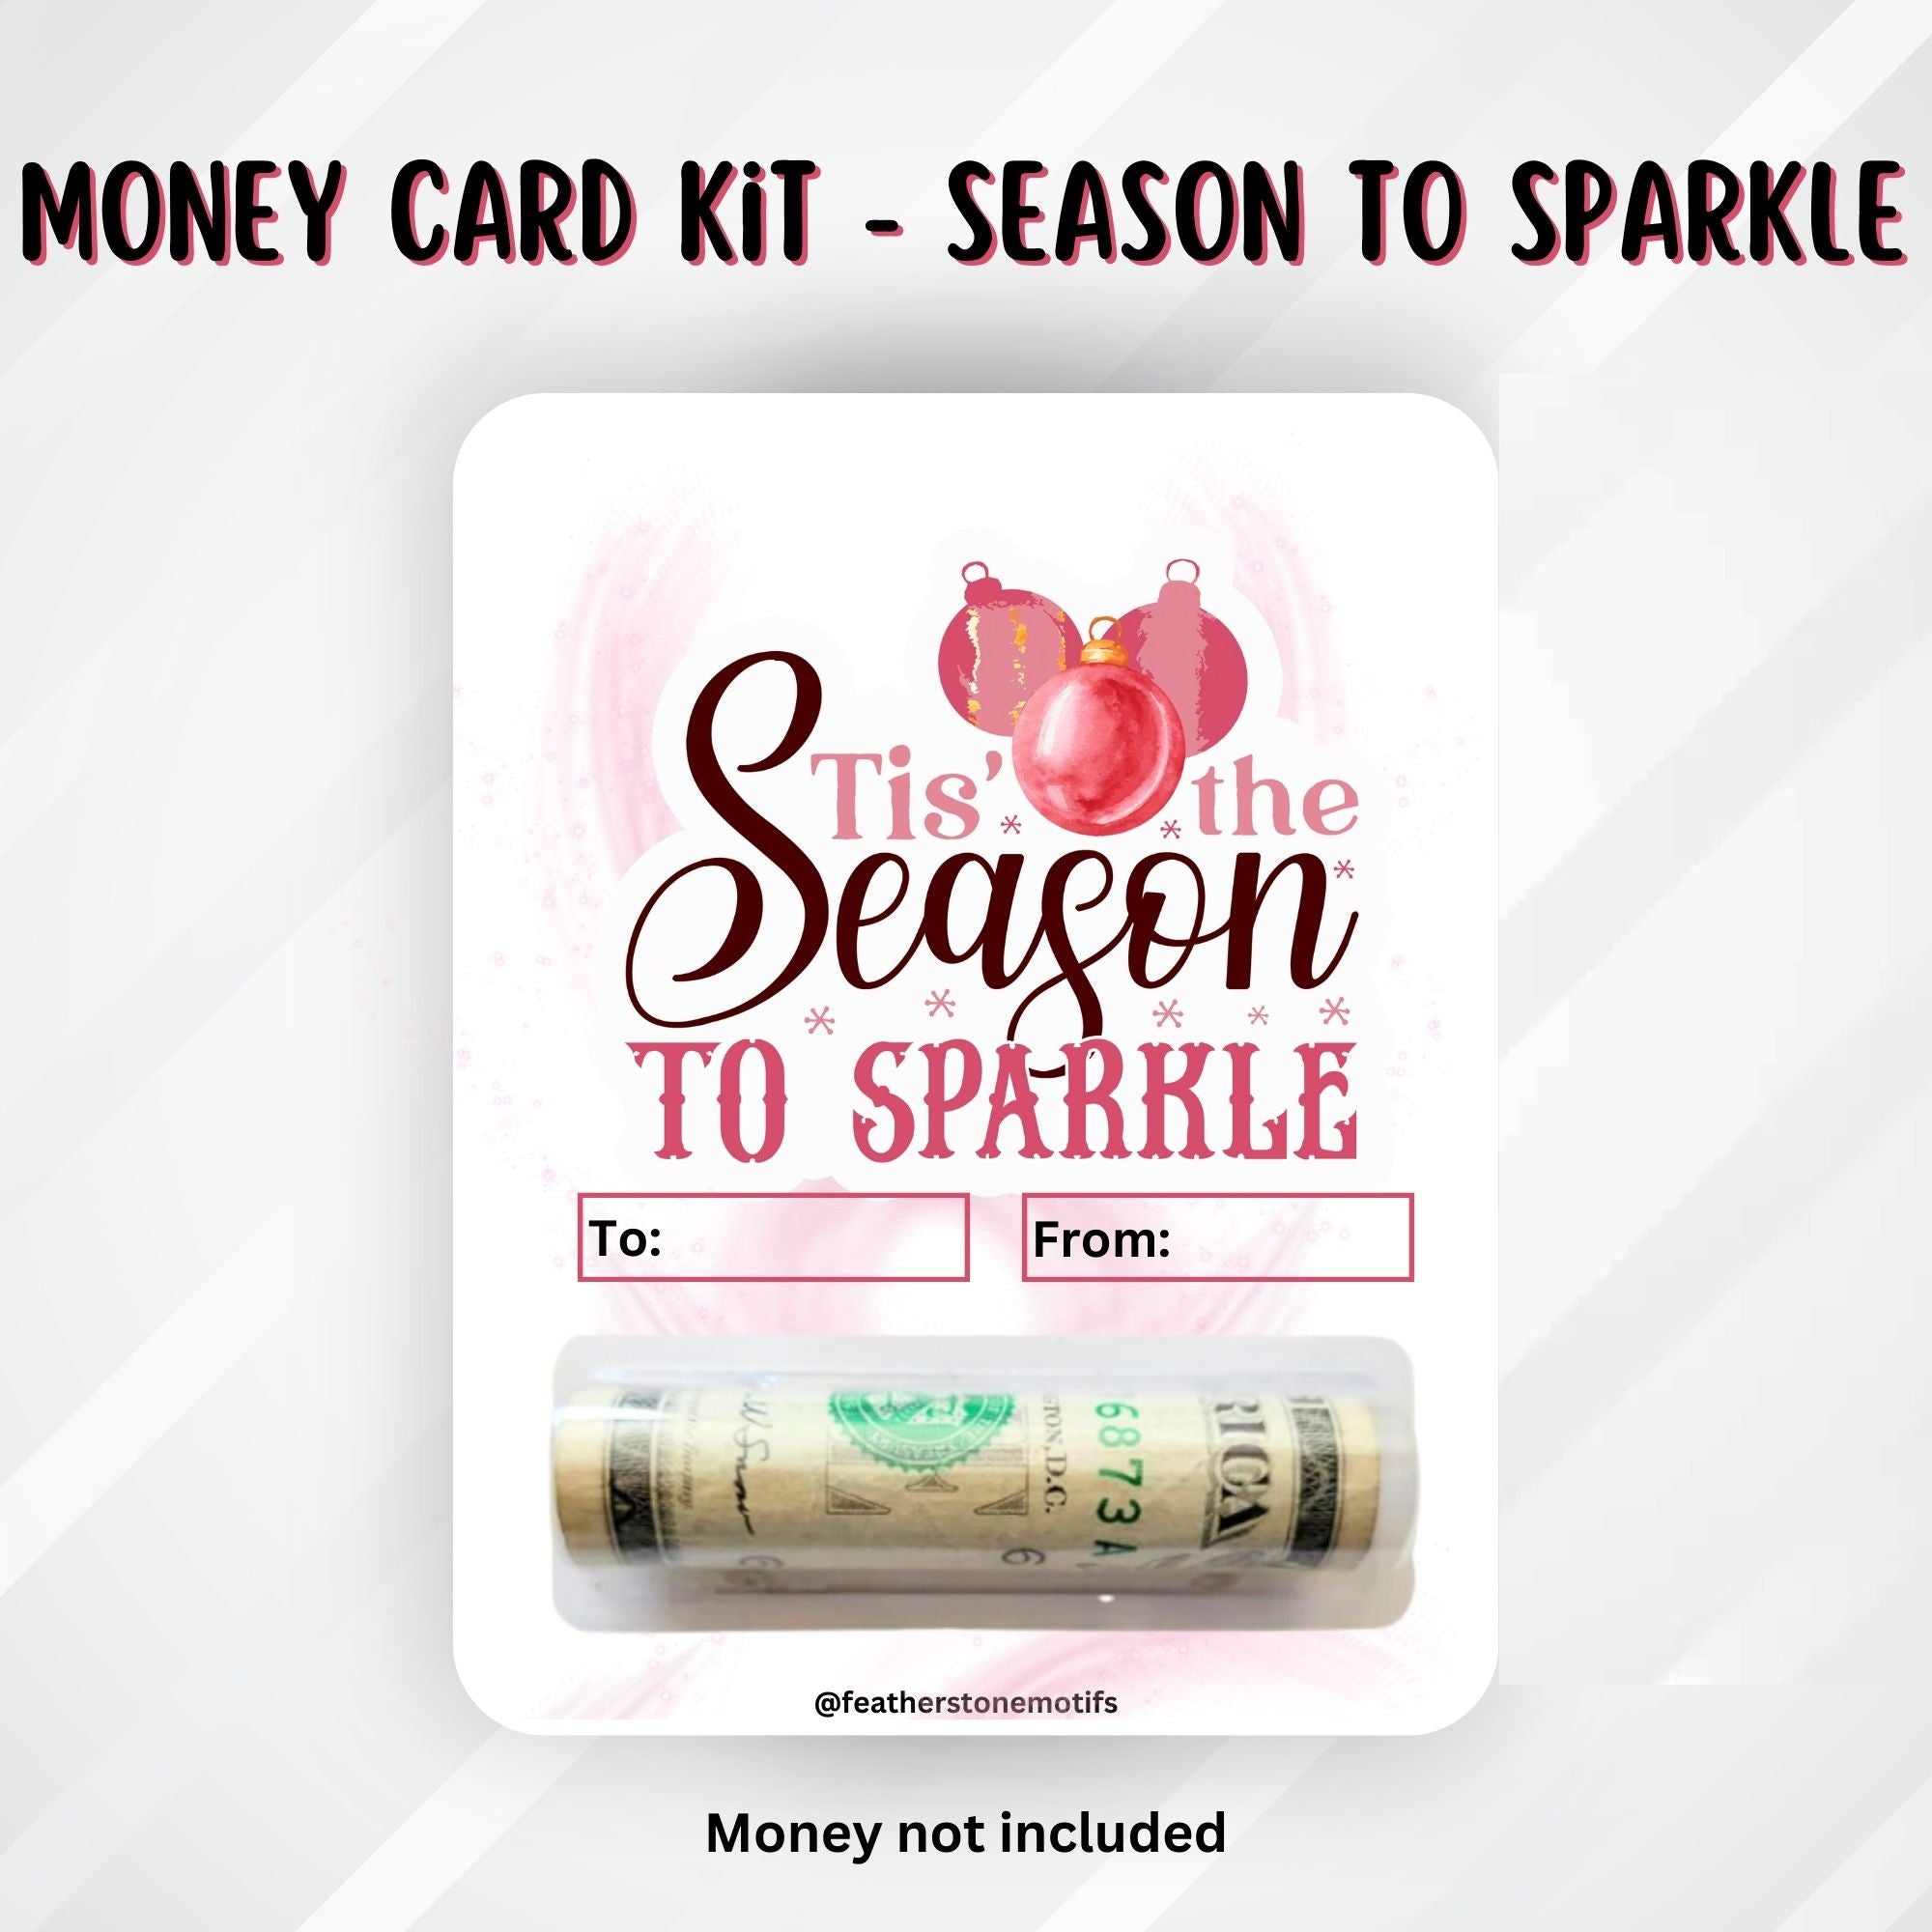 This image shows the money tube attached Season to Sparkle Money Card